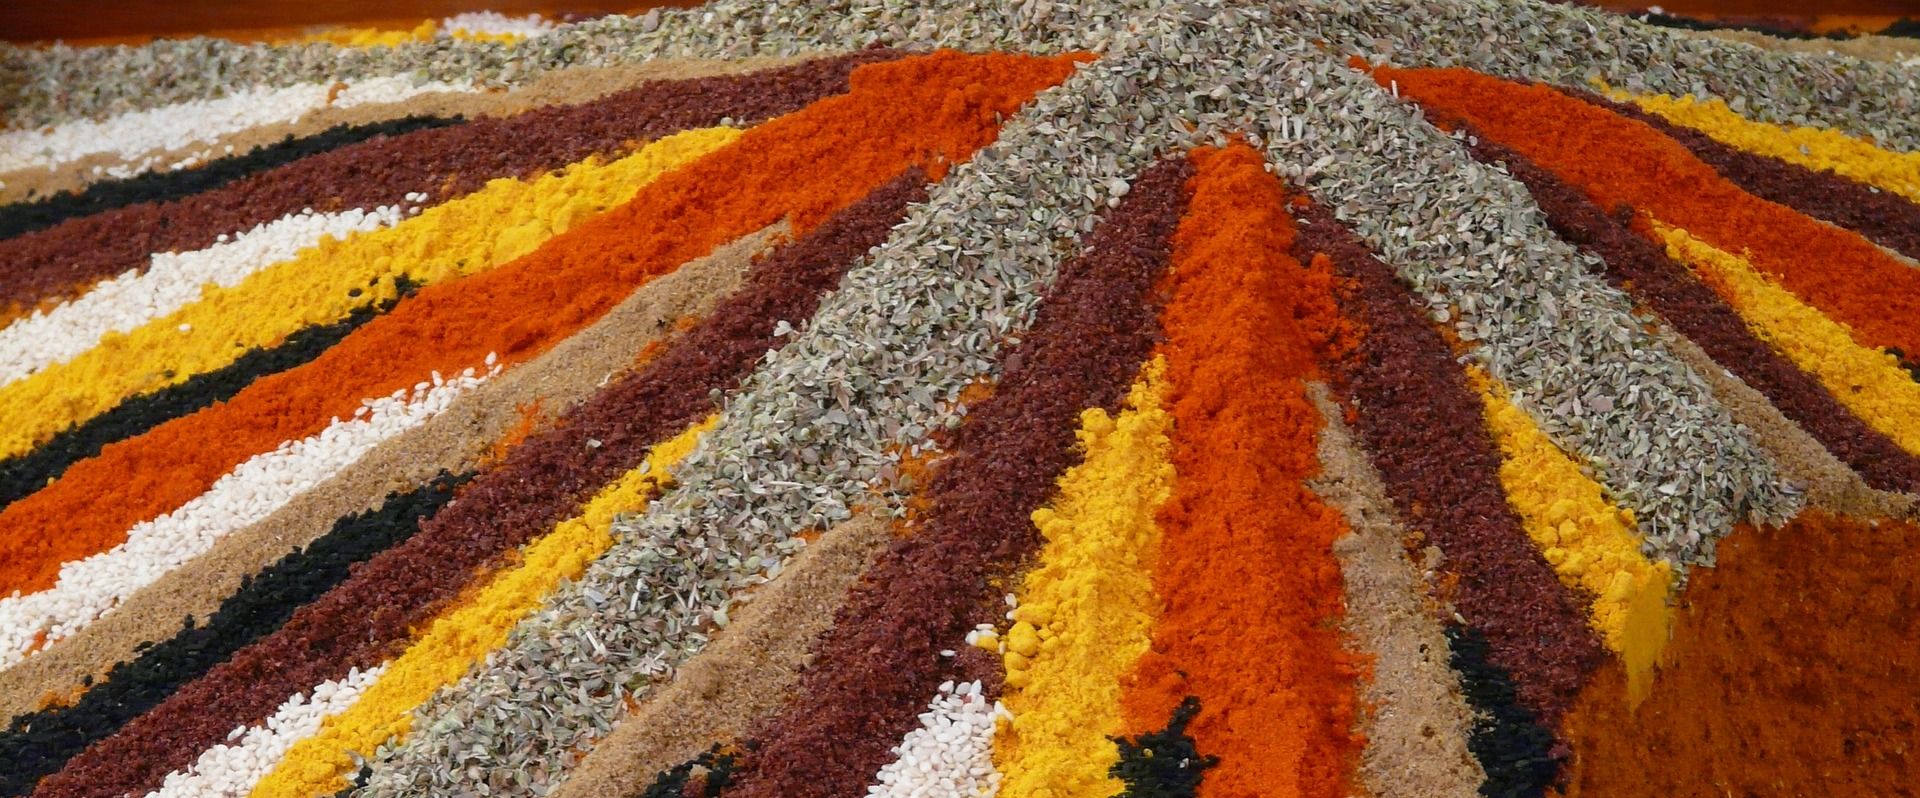 Spices trading